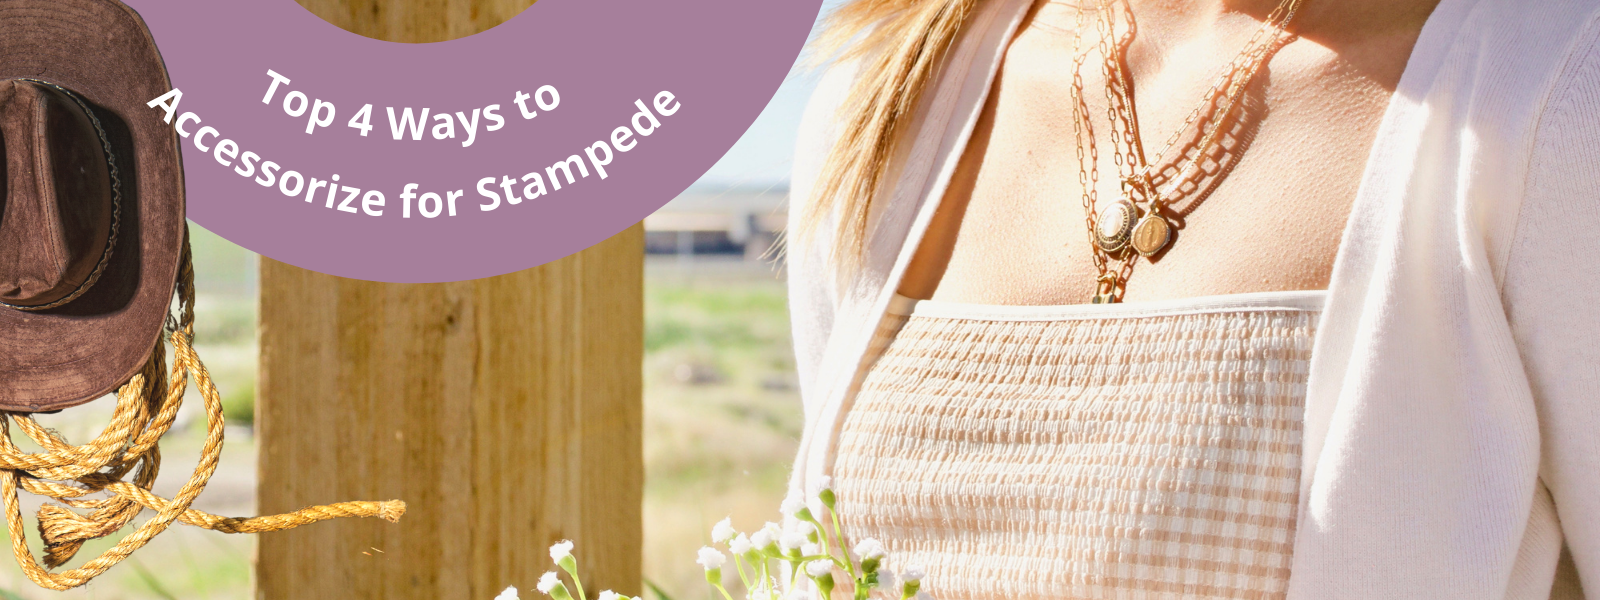 Top 4 ways to accessorize for the Stampede